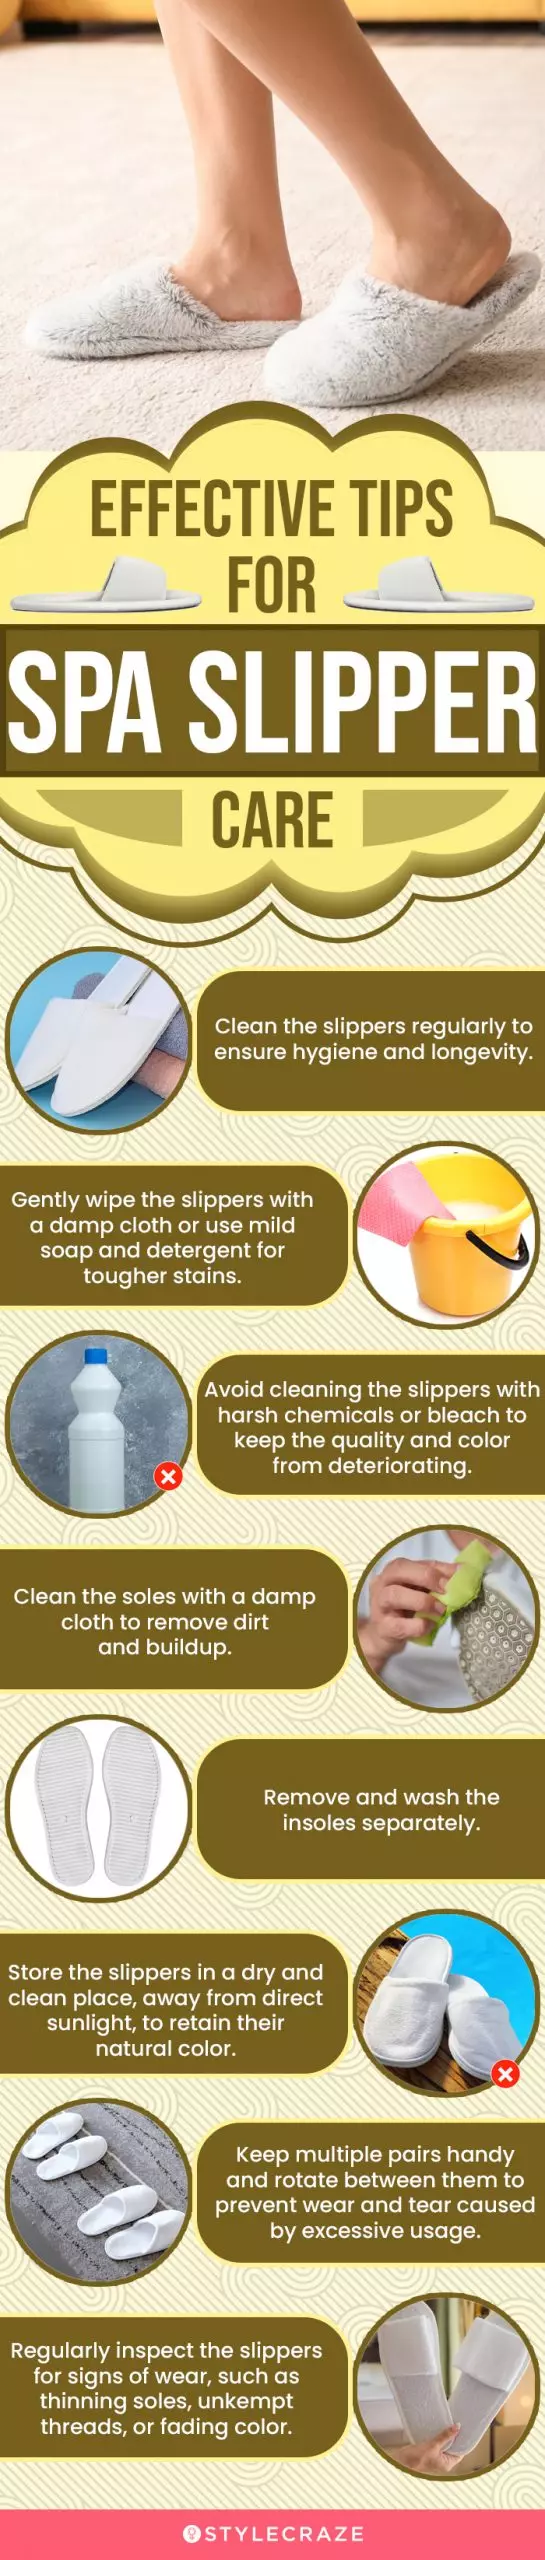 Effective Tips For Spa Slipper Care (infographic)